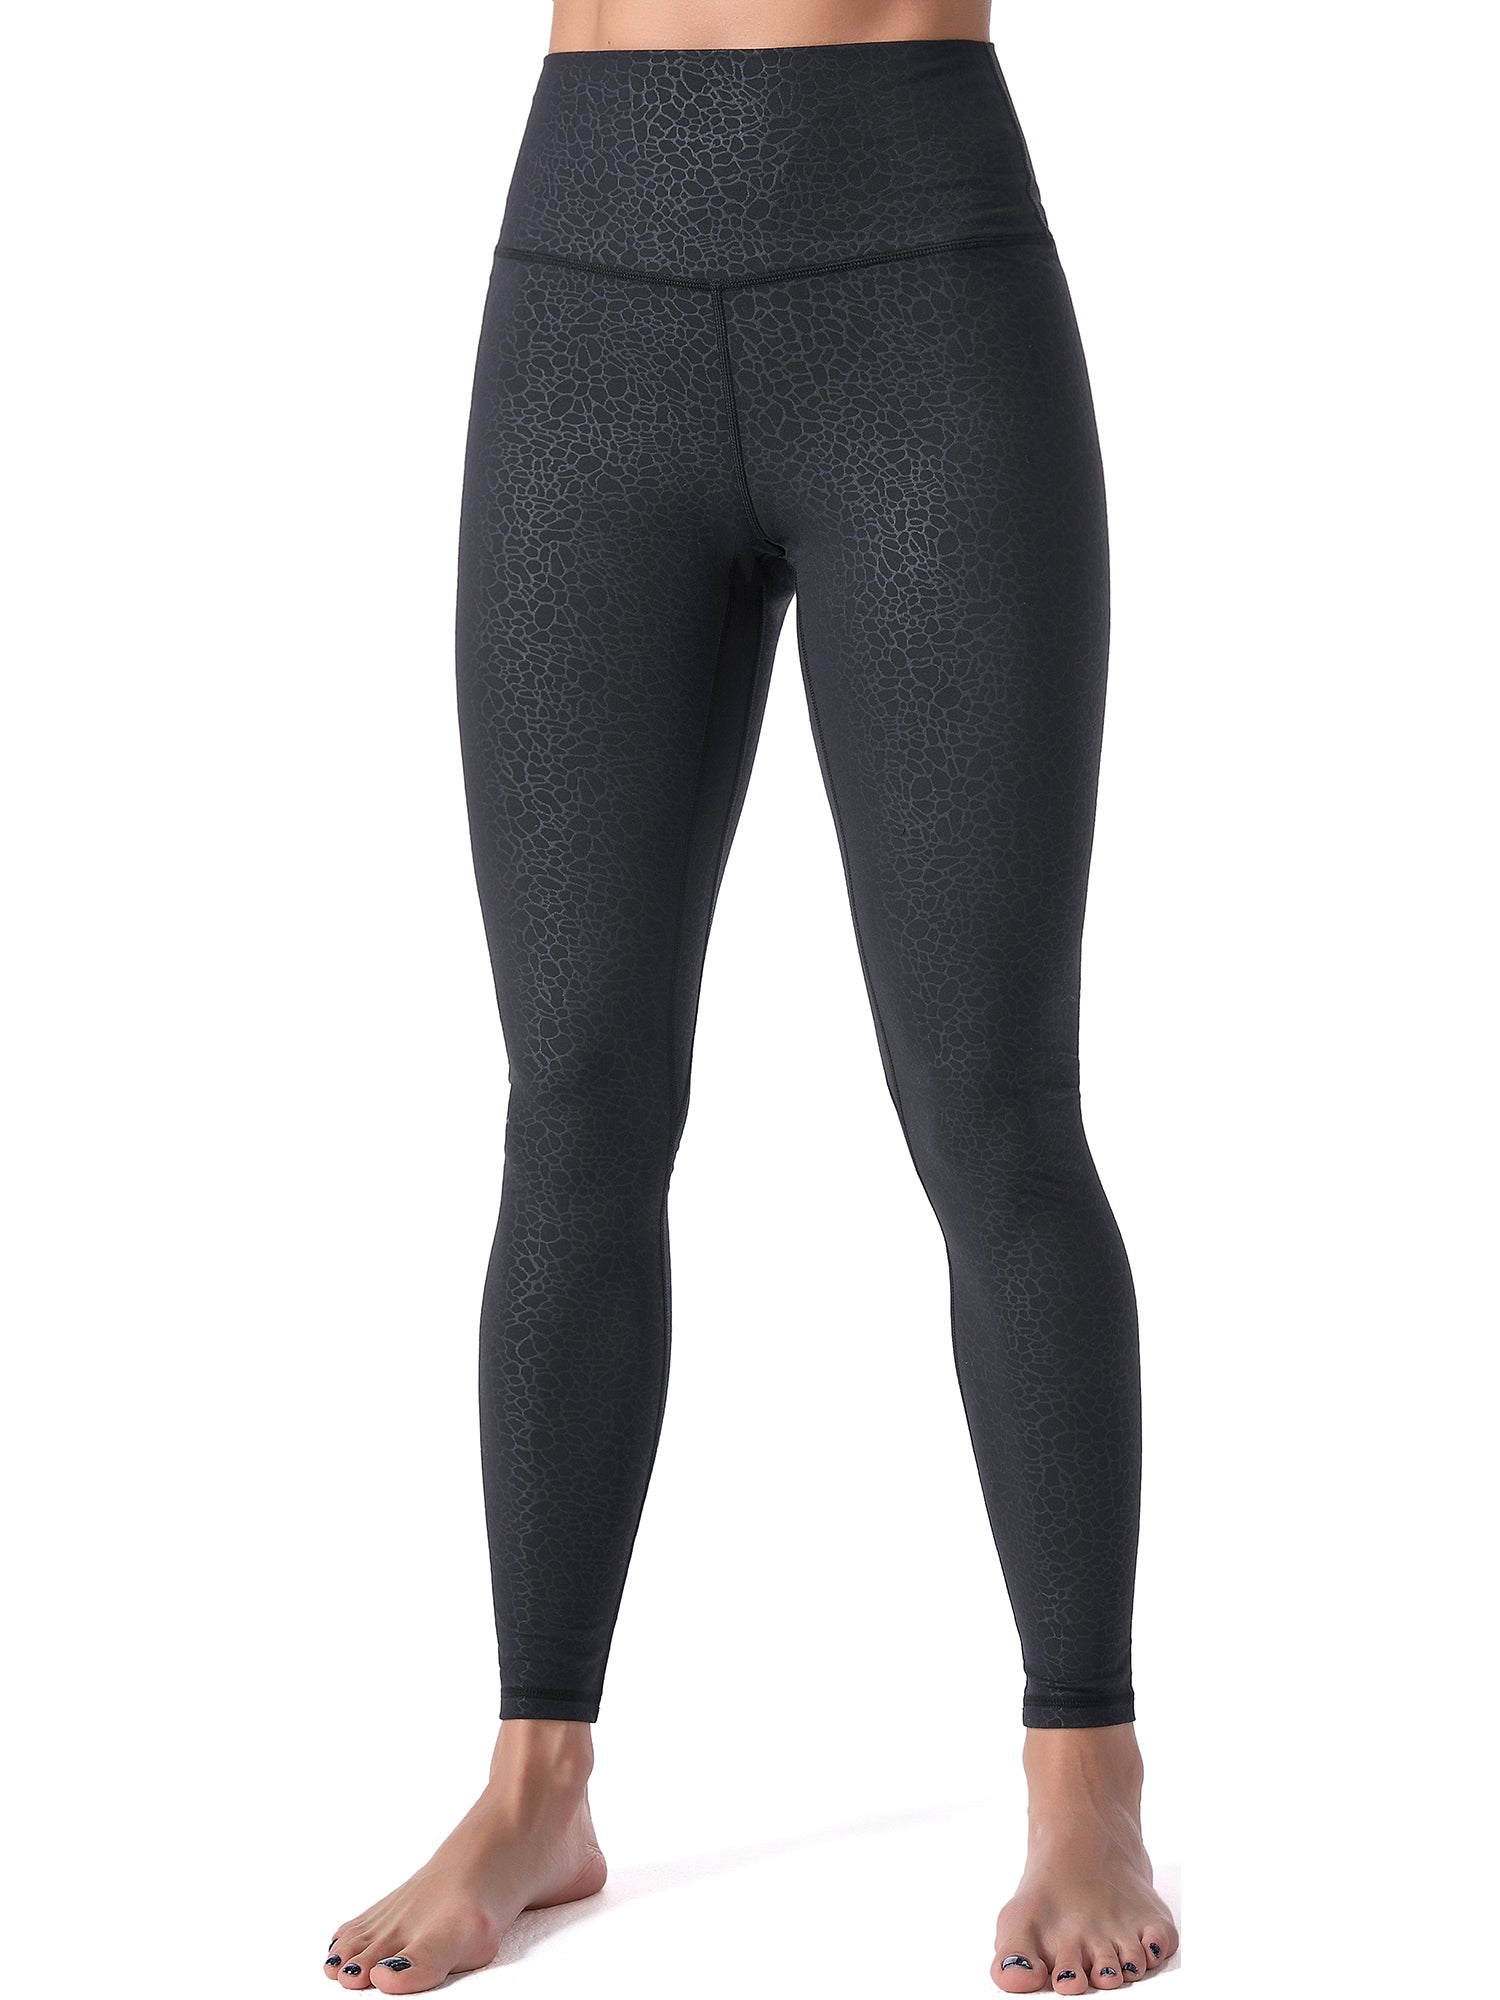 Sunzel High Waisted Workout Leggings with Pockets for Women